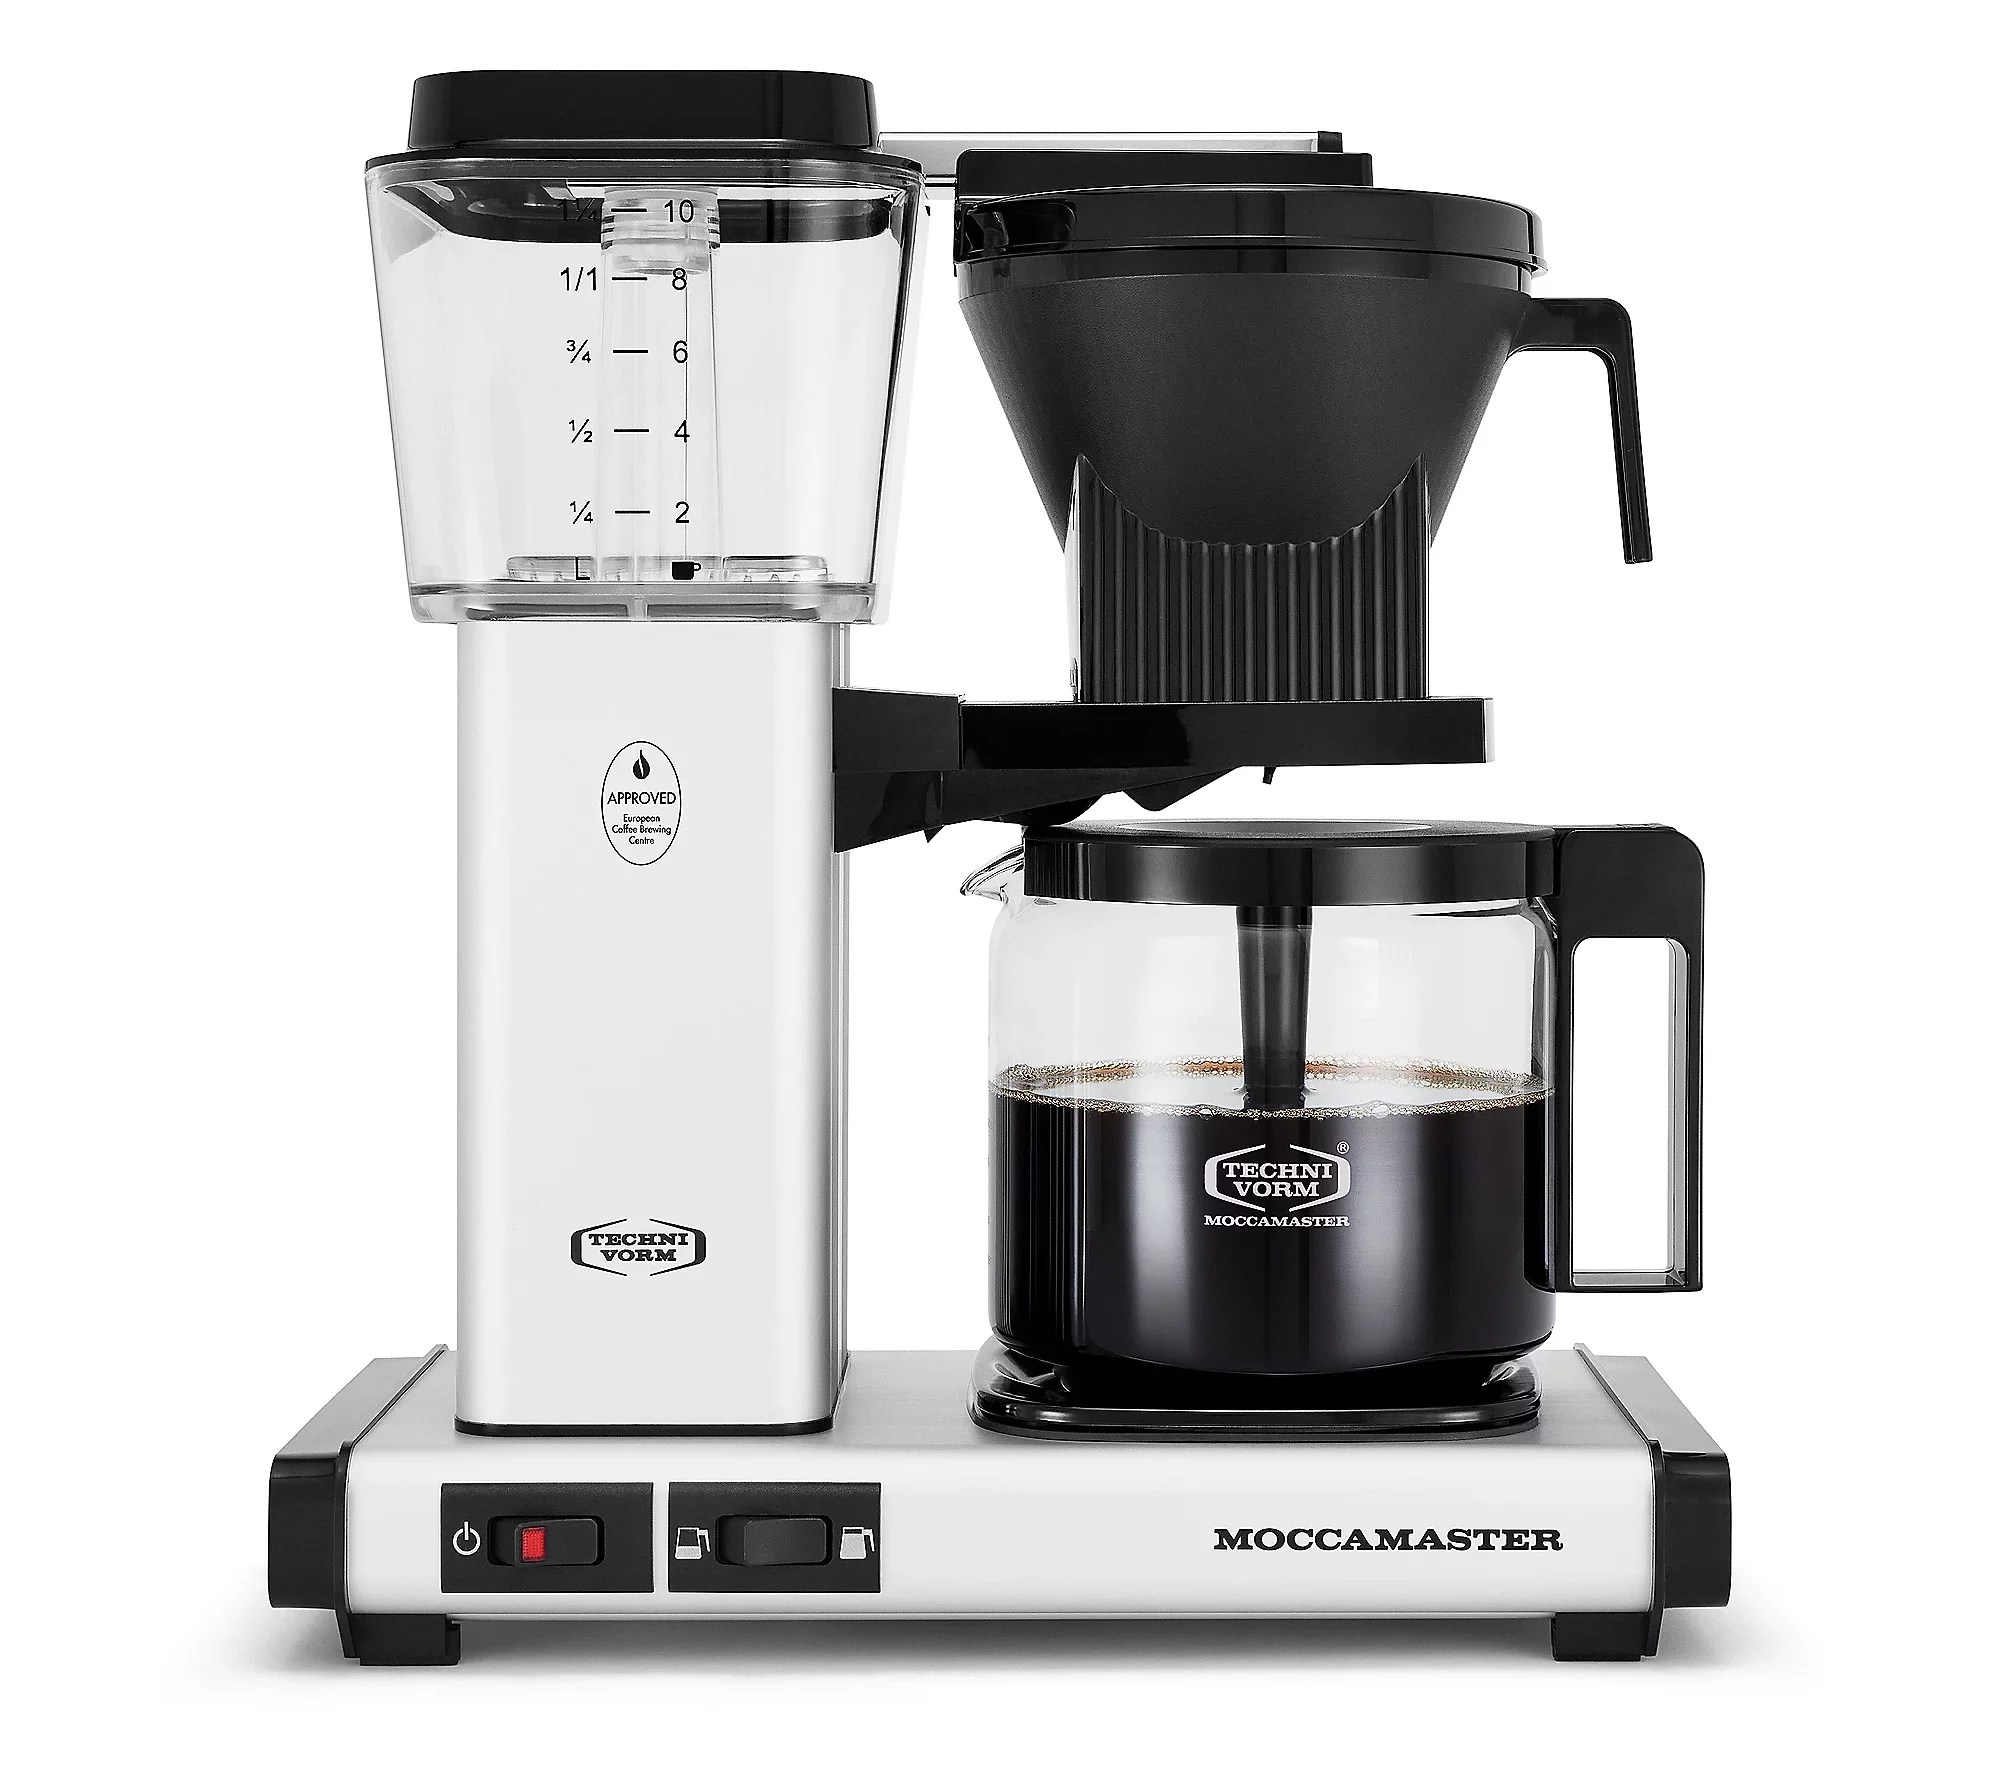 The Lavazza Desea is an ideal Christmas gift for latte-lovers